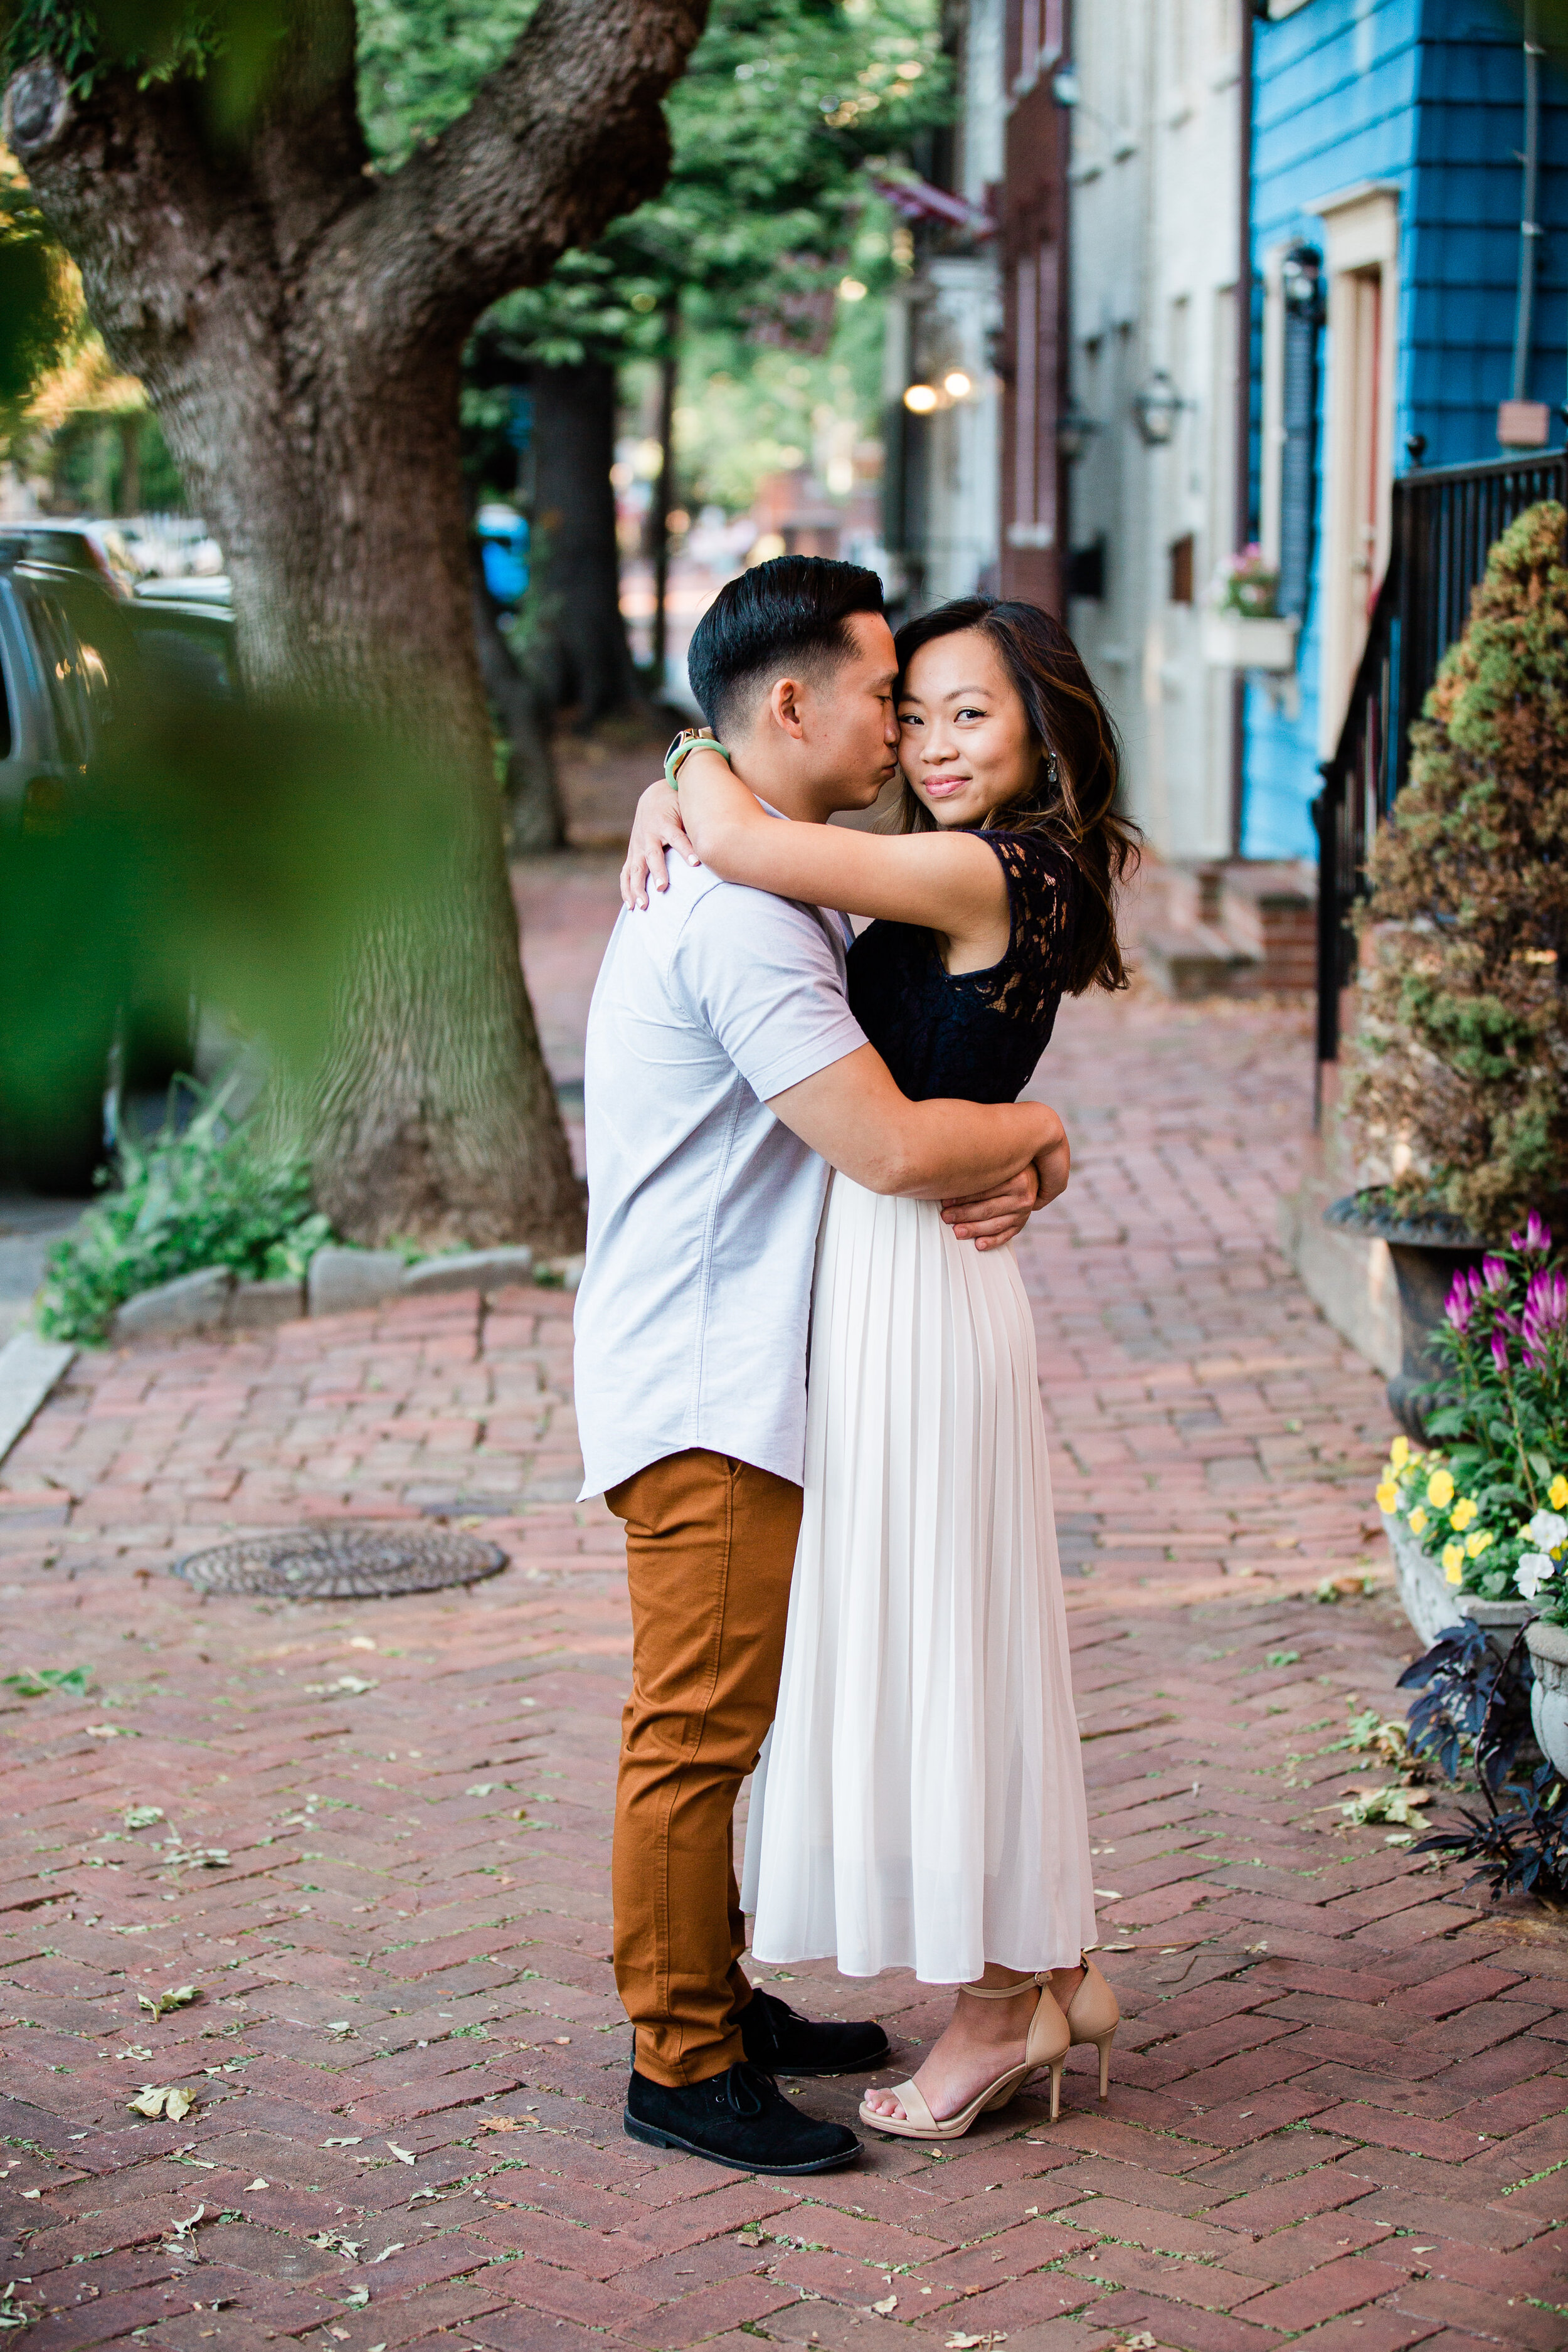 old_town_alexandria_engagements-4207.jpg